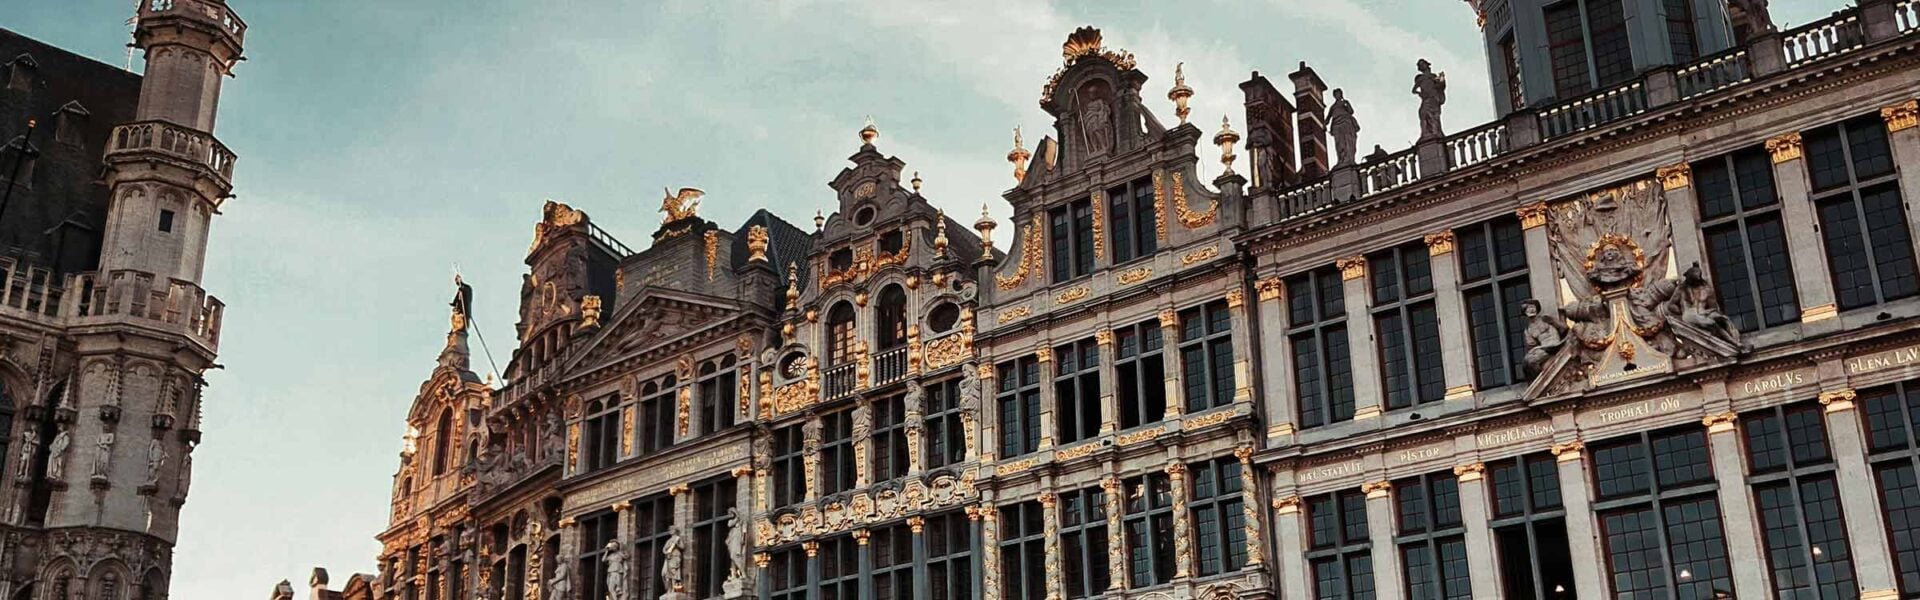 Ornate architecture at the Grand place in Brussels.